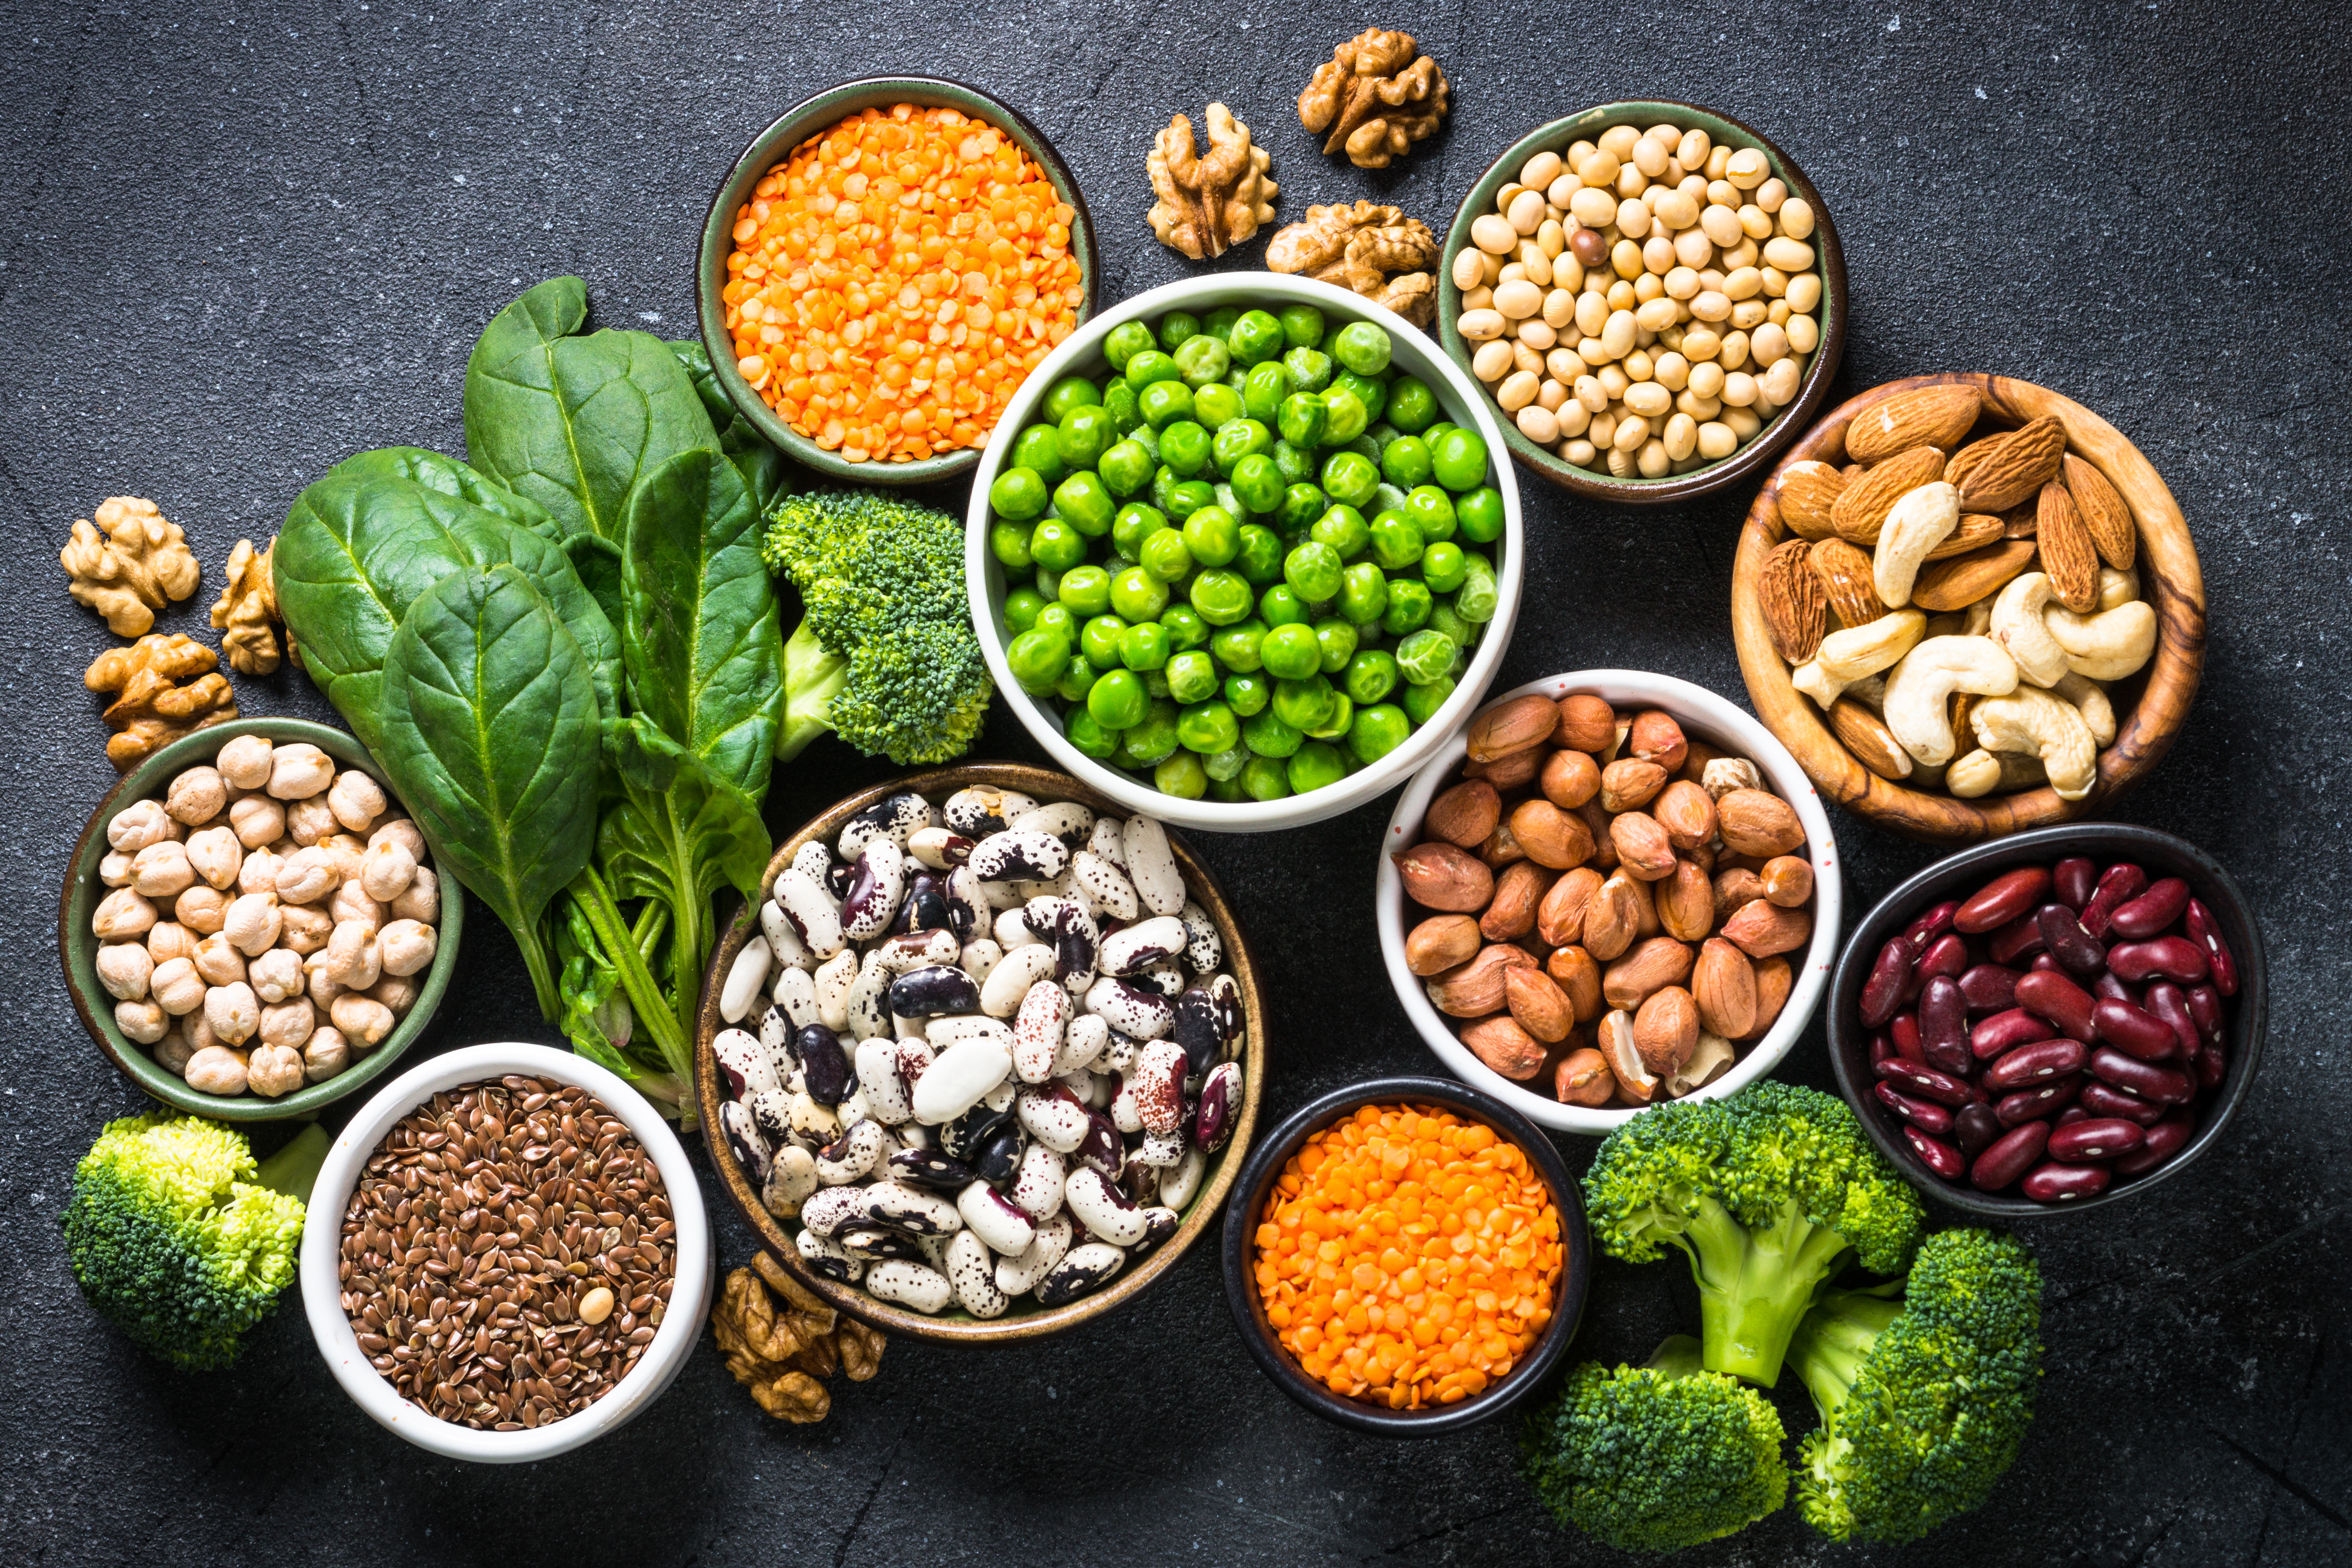 Plant-based: What’s new, what’s next – an expanding opportunity